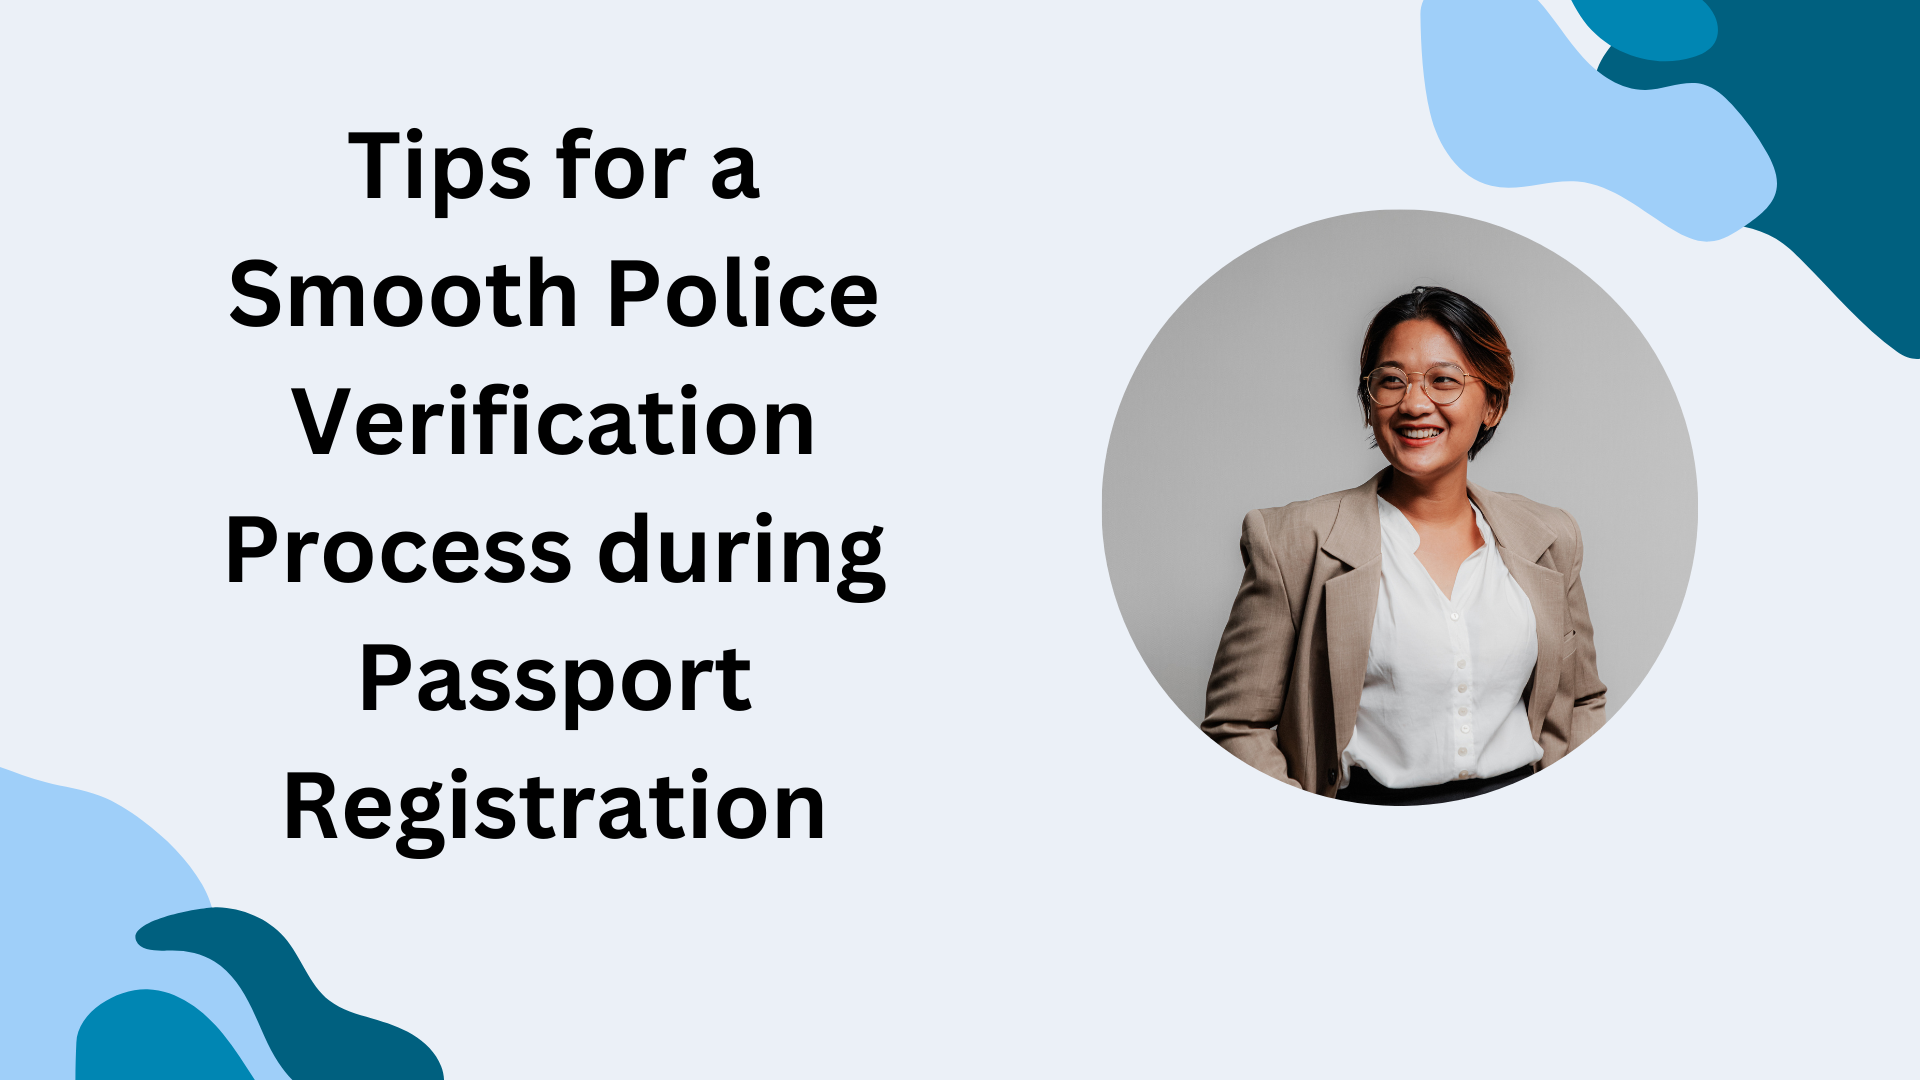 Tips for a Smooth Police Verification Process during Passport Registration